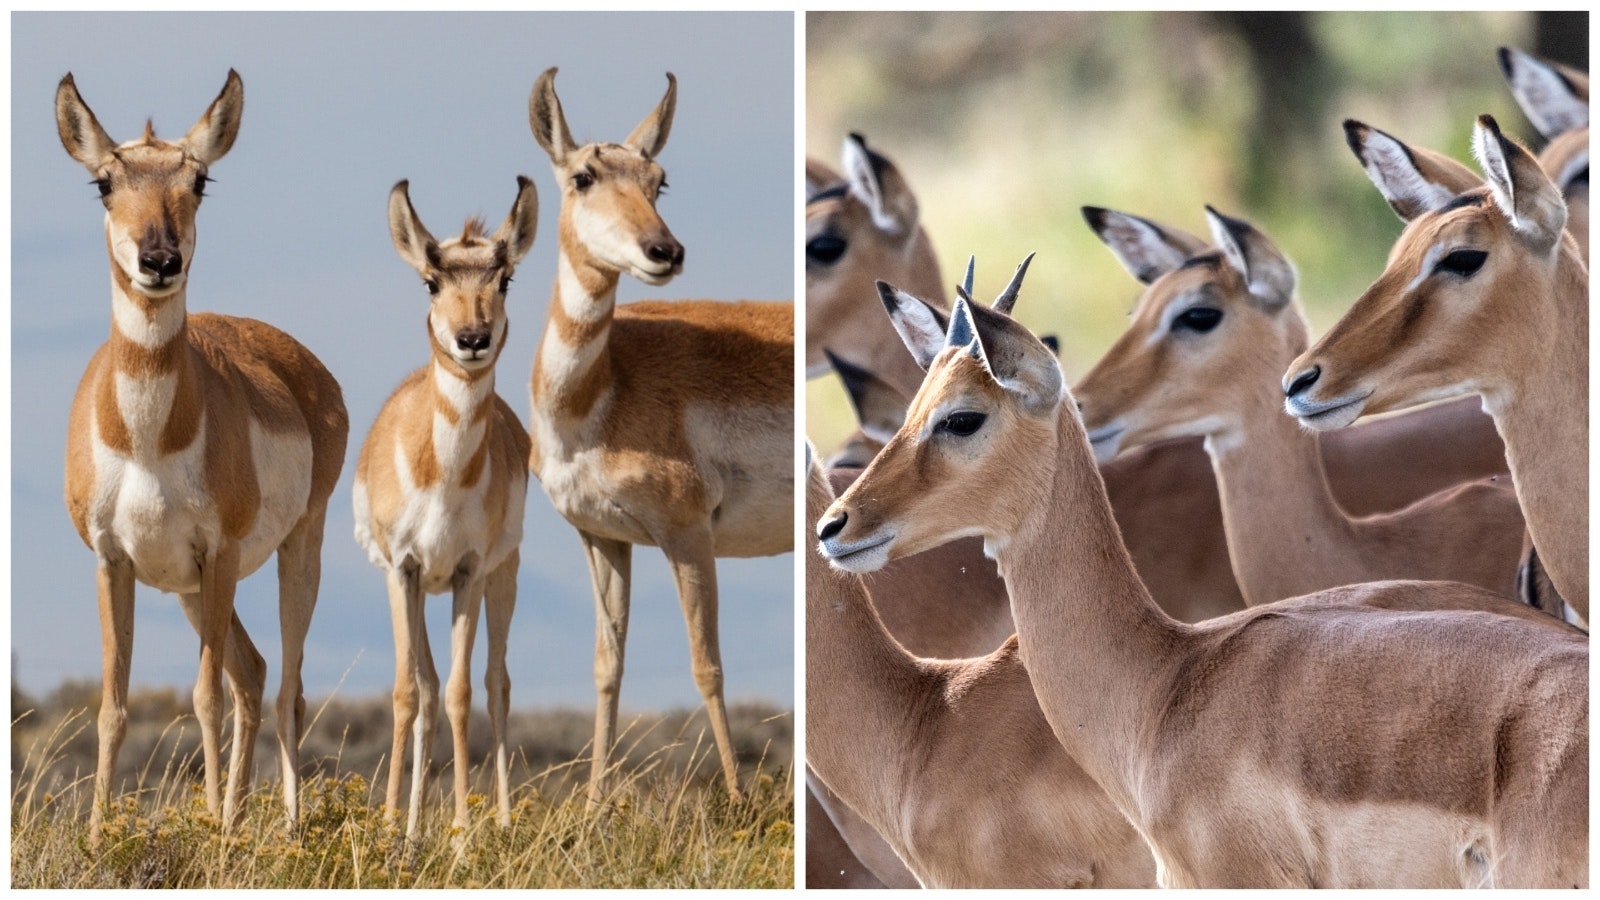 Wyoming pronghorn, left, and antelope in Africa, right.